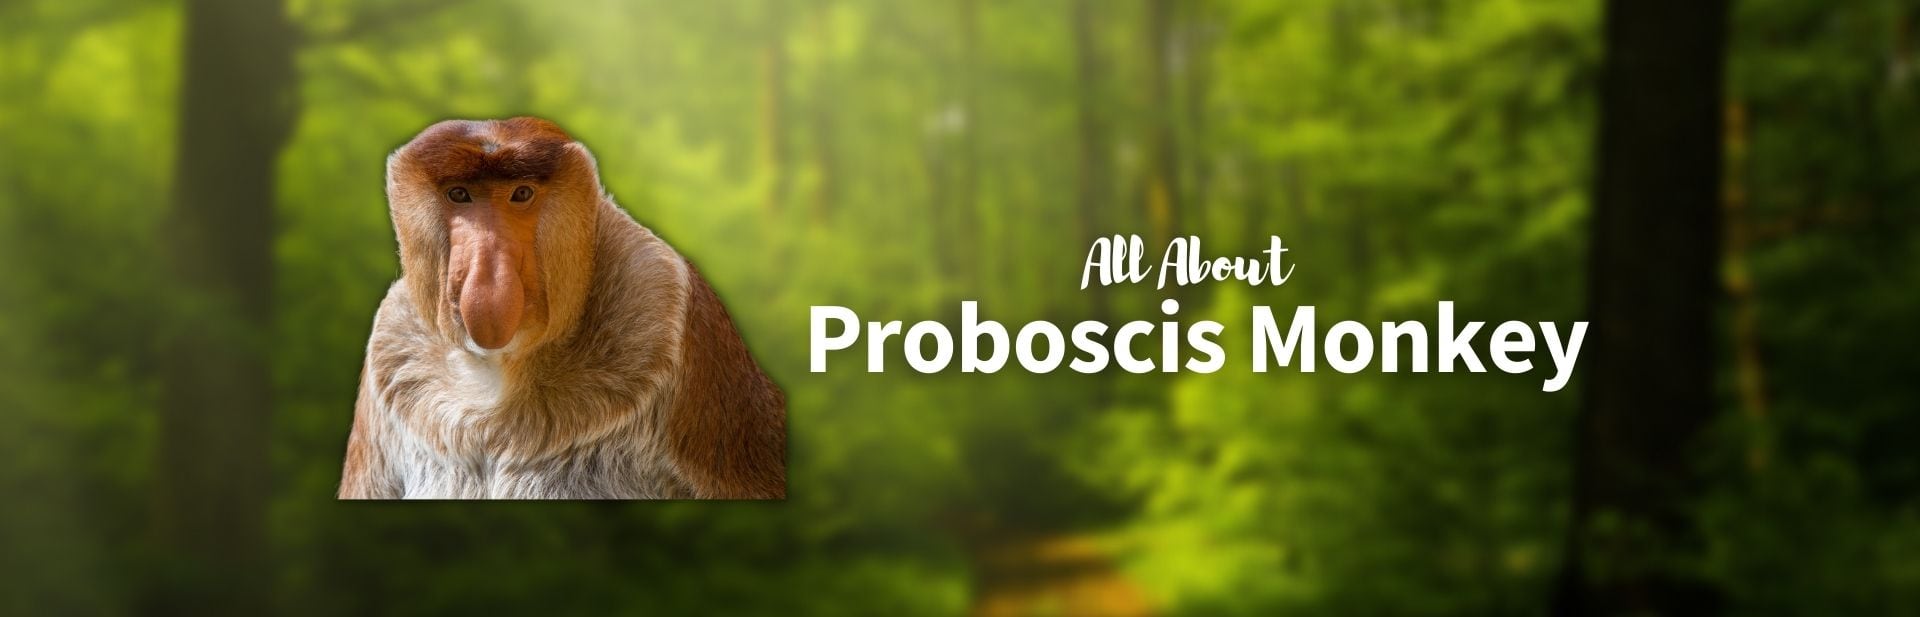 Proboscis Monkey: All About These Long-Nosed Primates